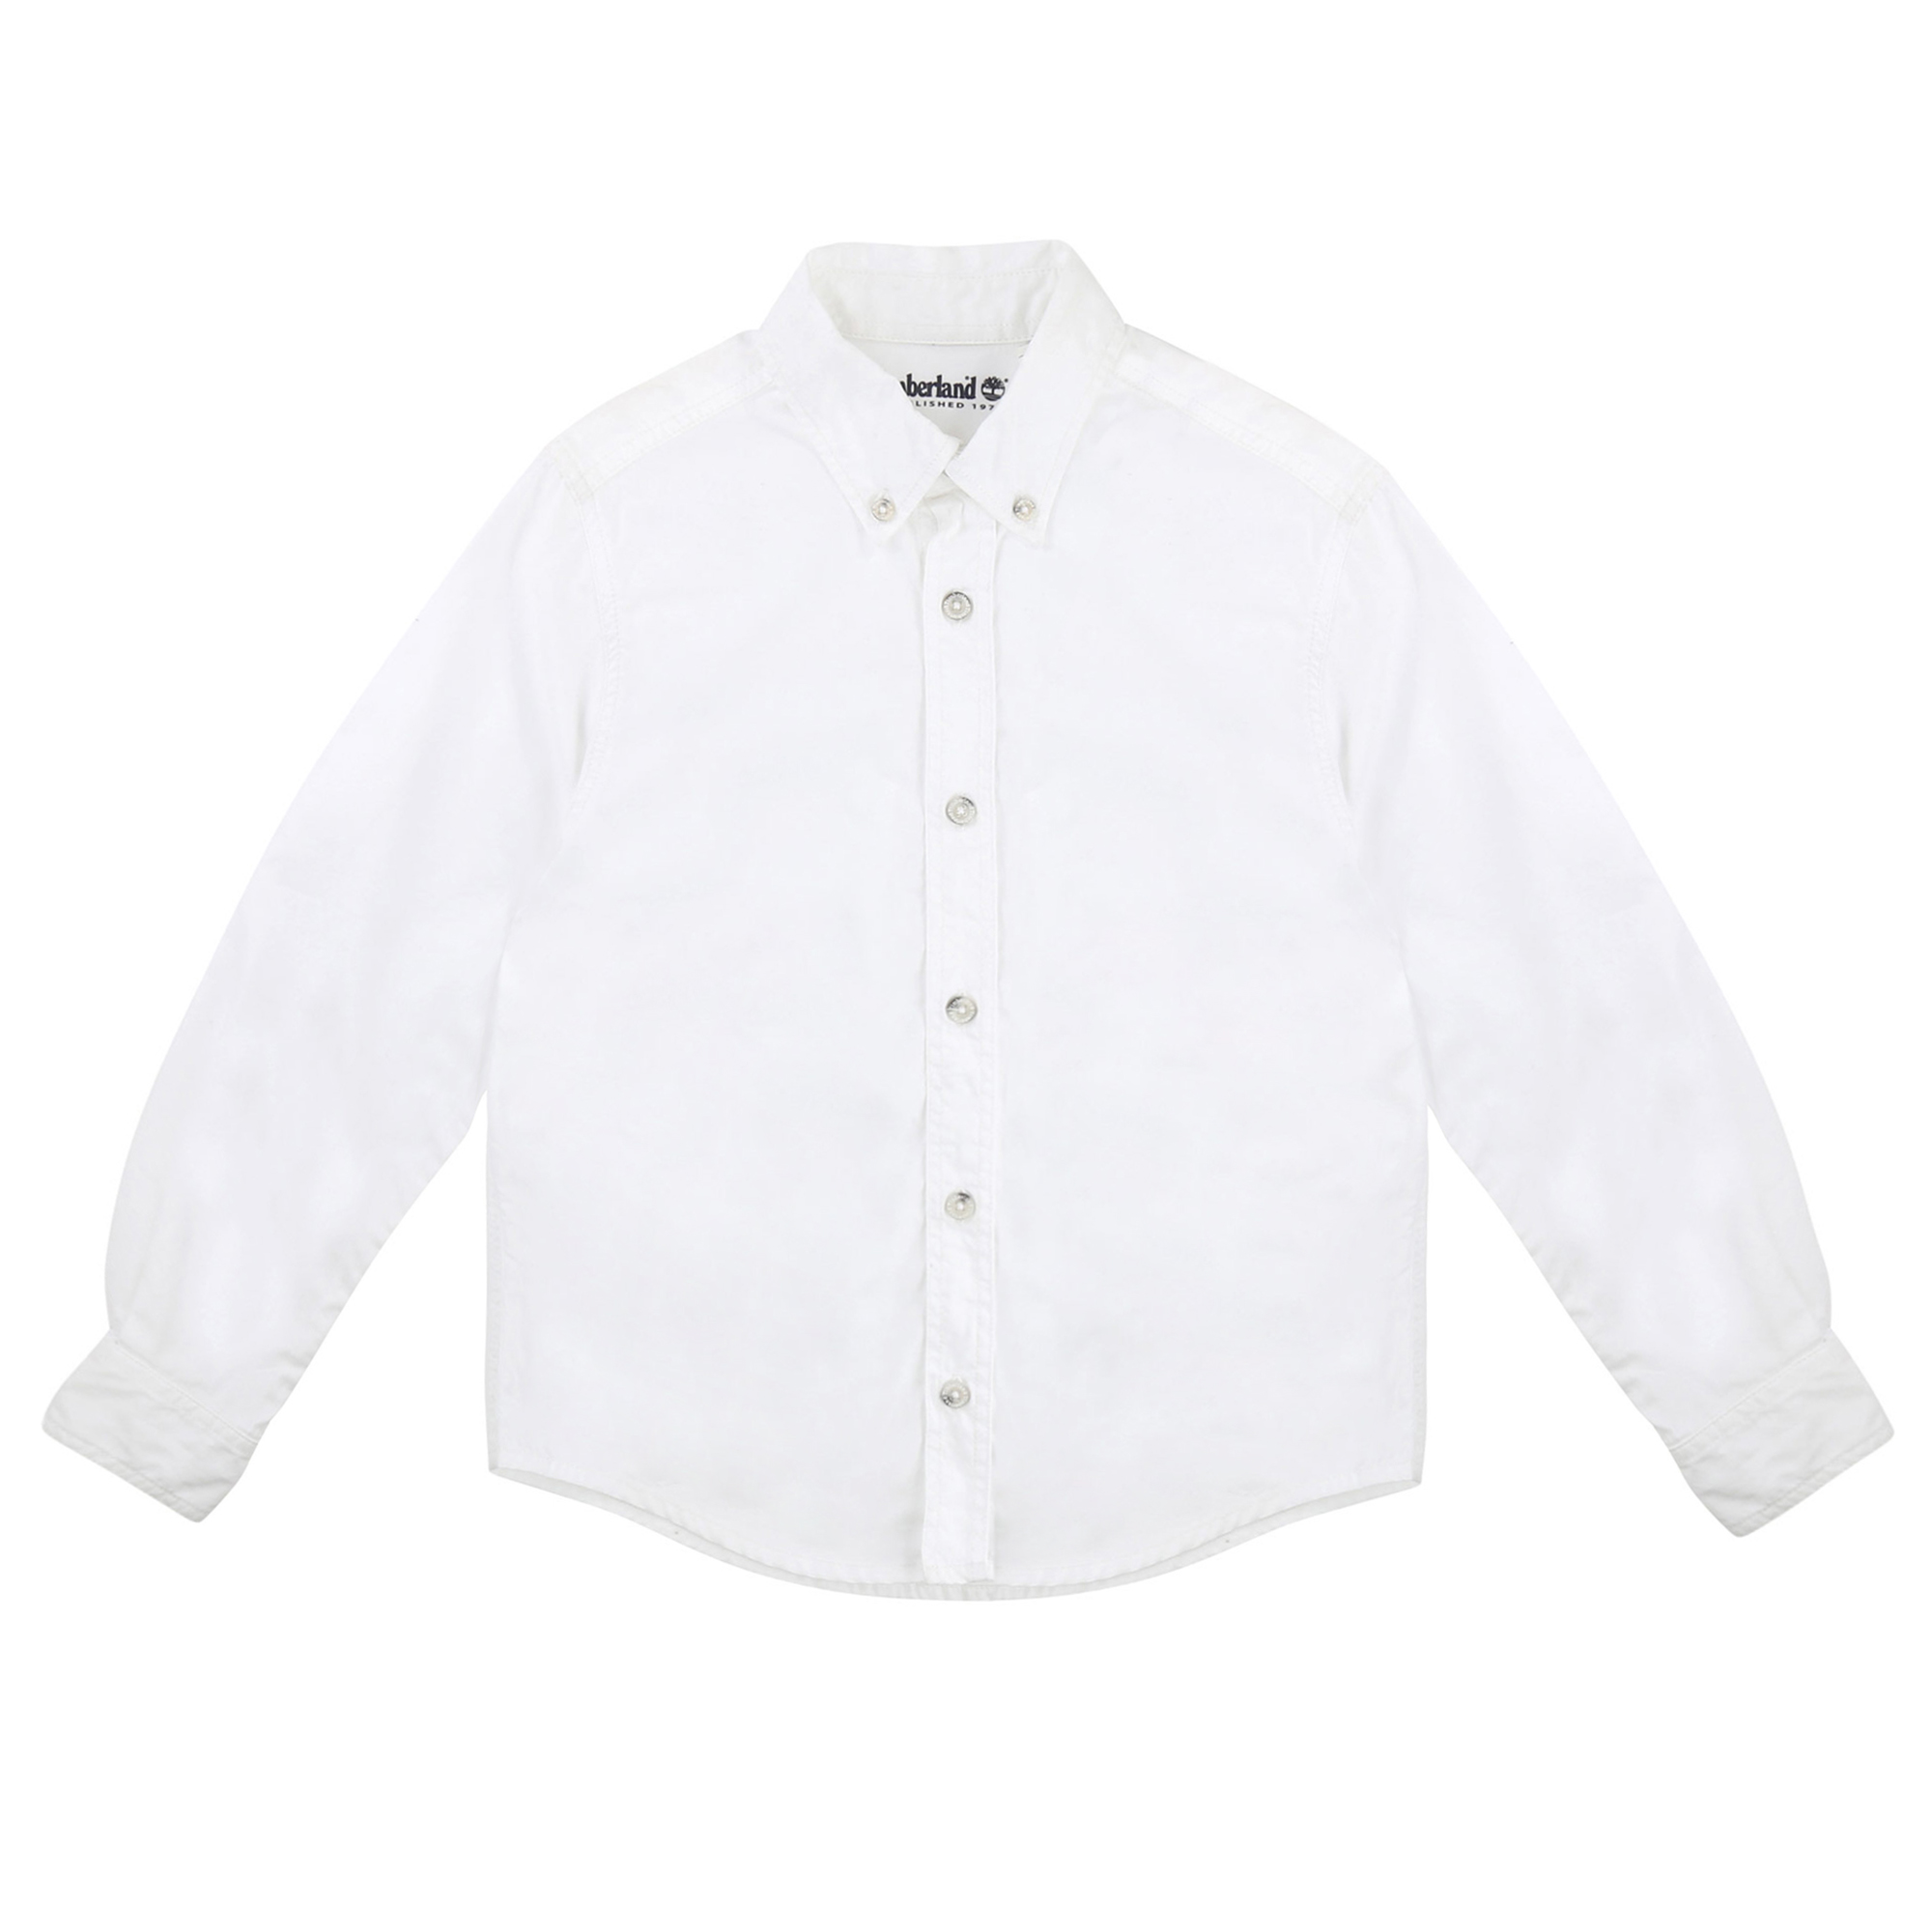 TIMBERLAND Chemise coton manches longues GARCON 6A Blanc